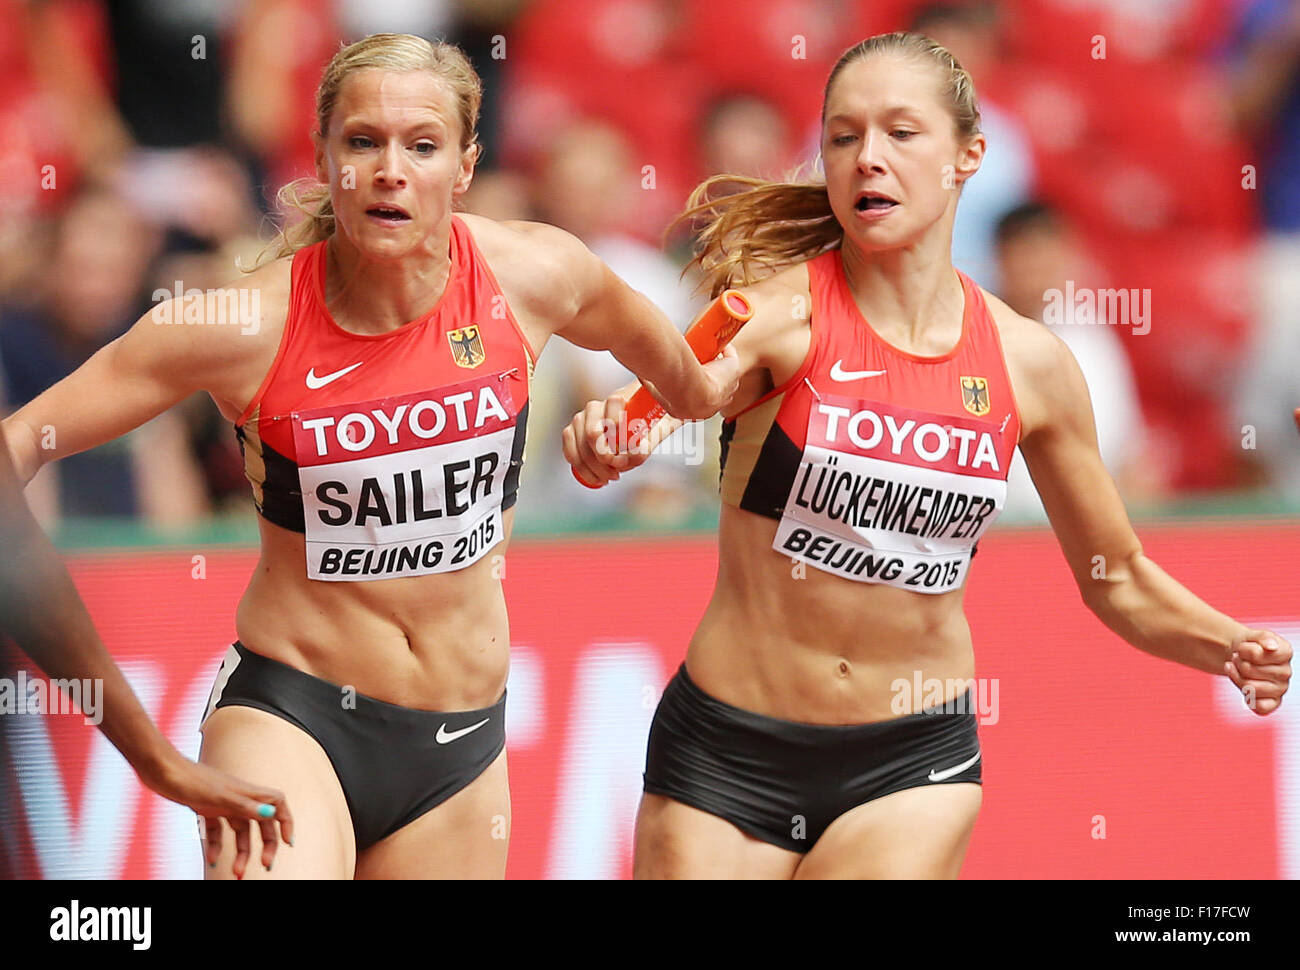 Beijing, China. 29th Aug, 2015. Germany's Verena Sailer and Gina Lückenkemper in action in the women's 4x100 M Relay Qualification at the 15th International Association of Athletics Federations (IAAF) Athletics World Championships at the National stadium, known as Bird's Nest, in Beijing, China, 29 August 2015. Photo: Christian Charisius/dpa/Alamy Live News Stock Photo